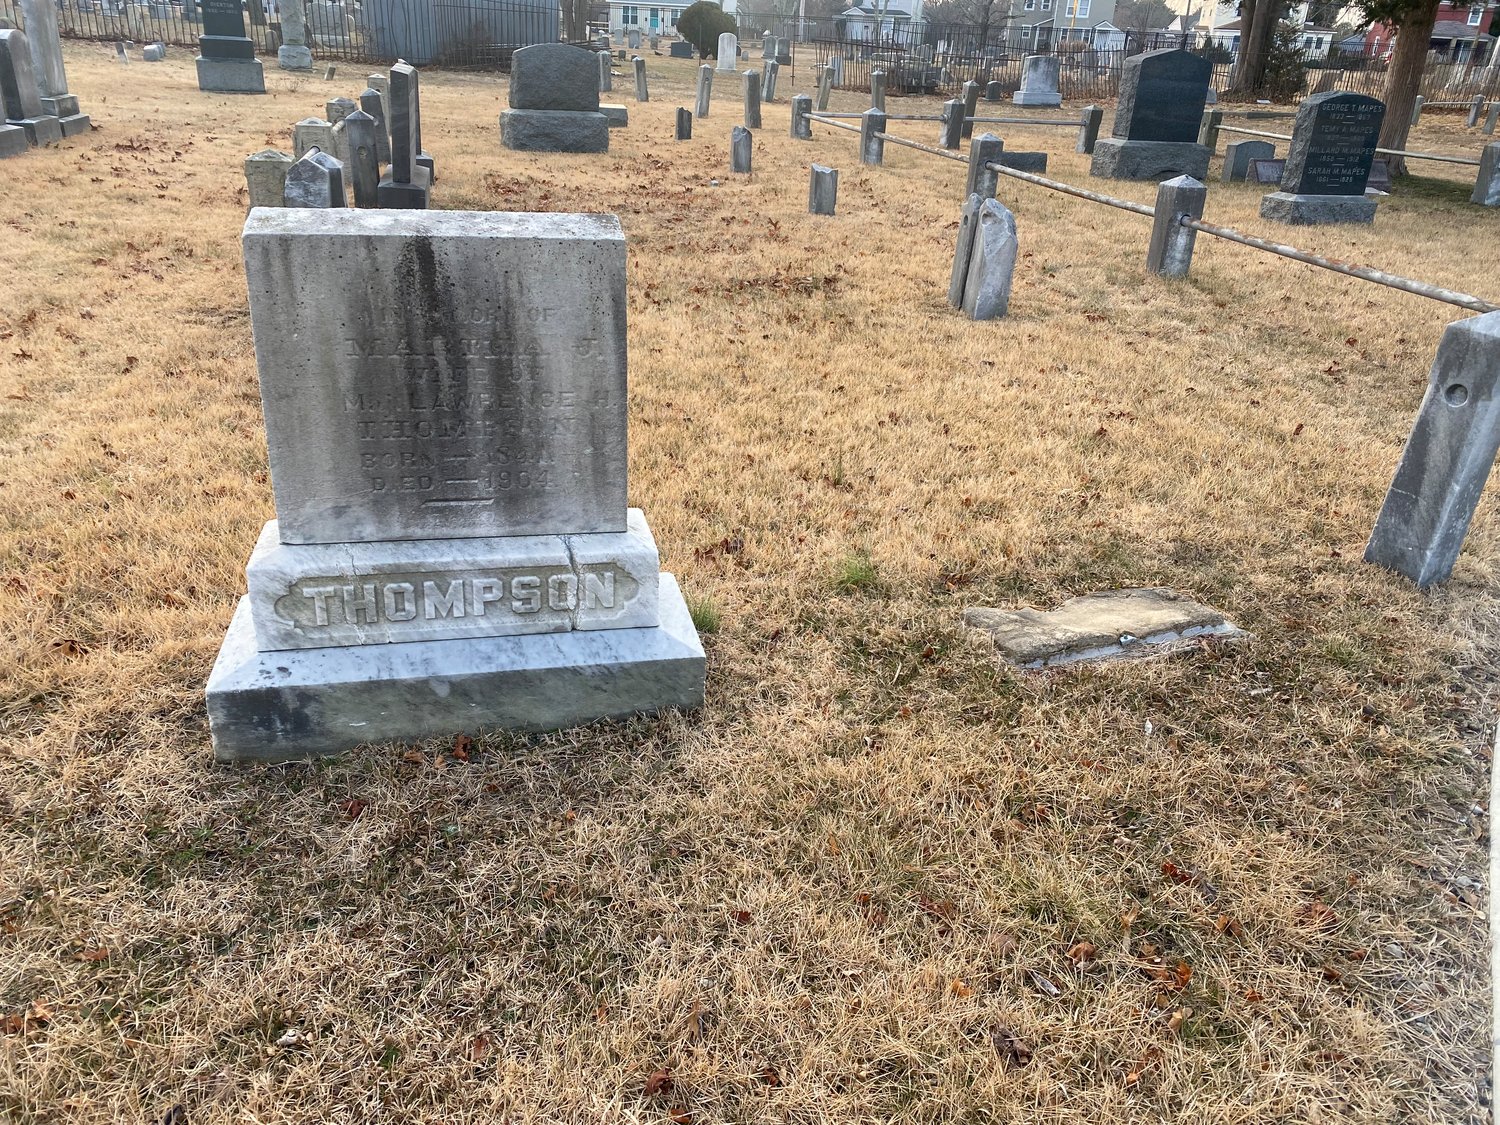 Maj. Thompson’s wife’s gravestone with the empty spot, presumed to be her husband, on the right.